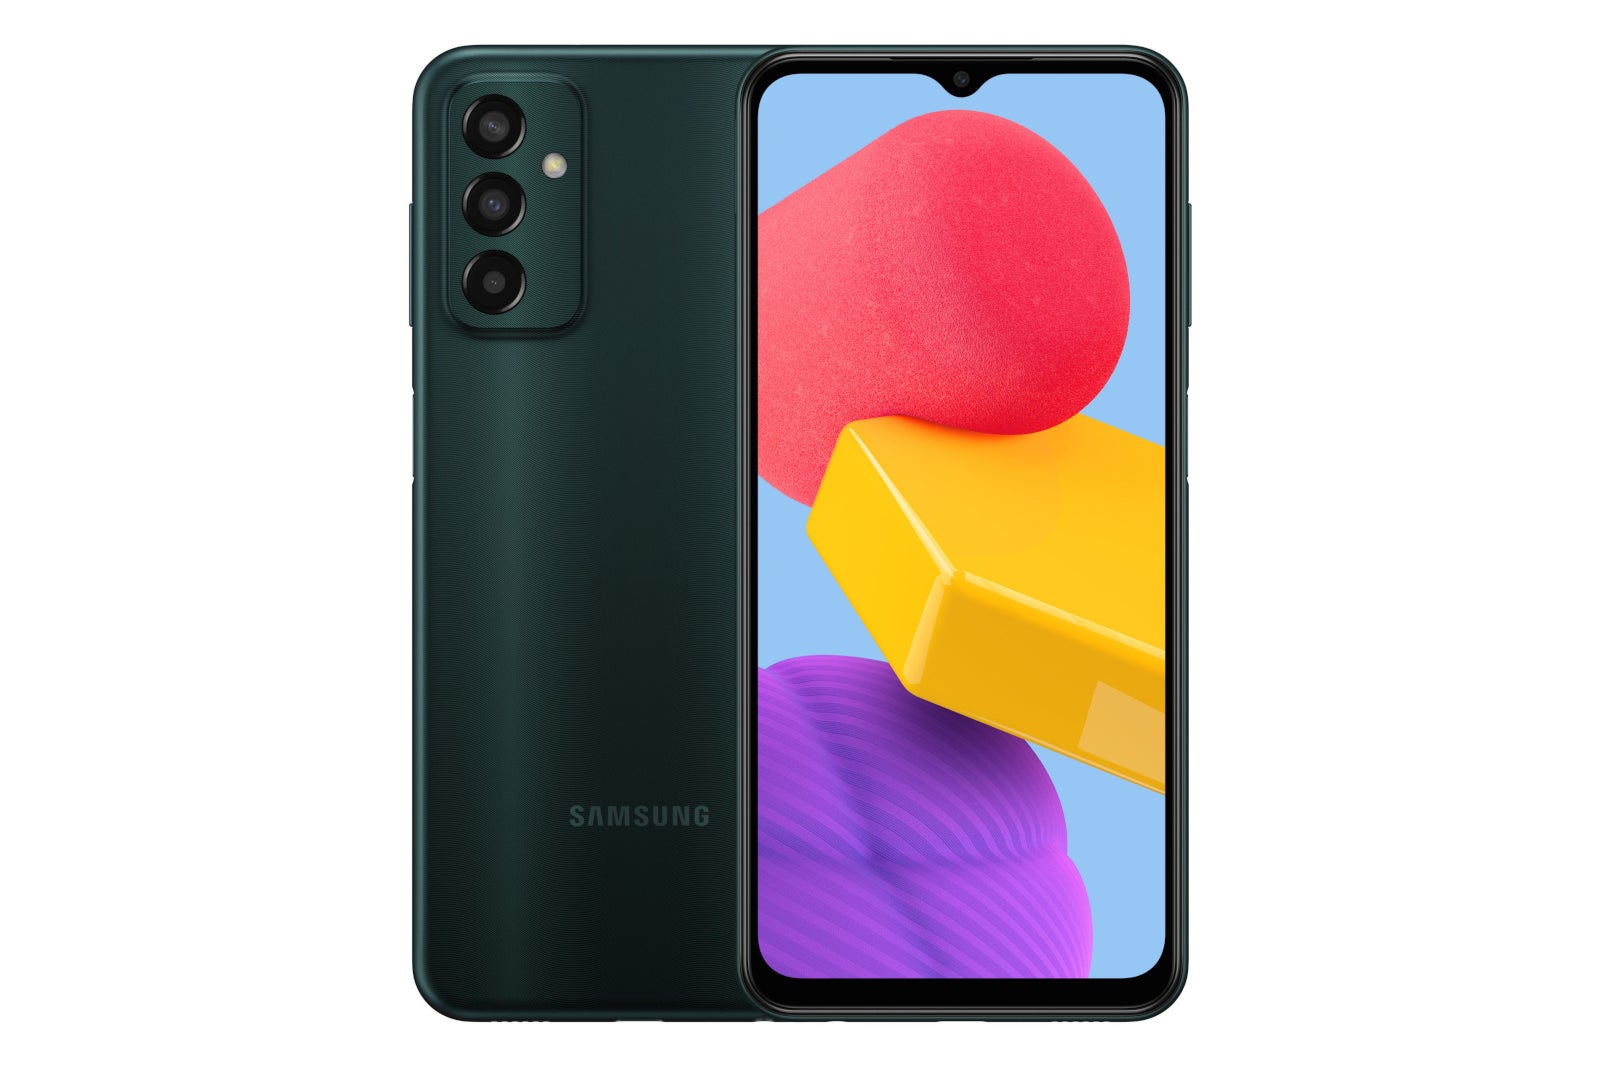 Samsung Galaxy M13 - Samsung Galaxy M13 high-res renders leaked ahead of launch